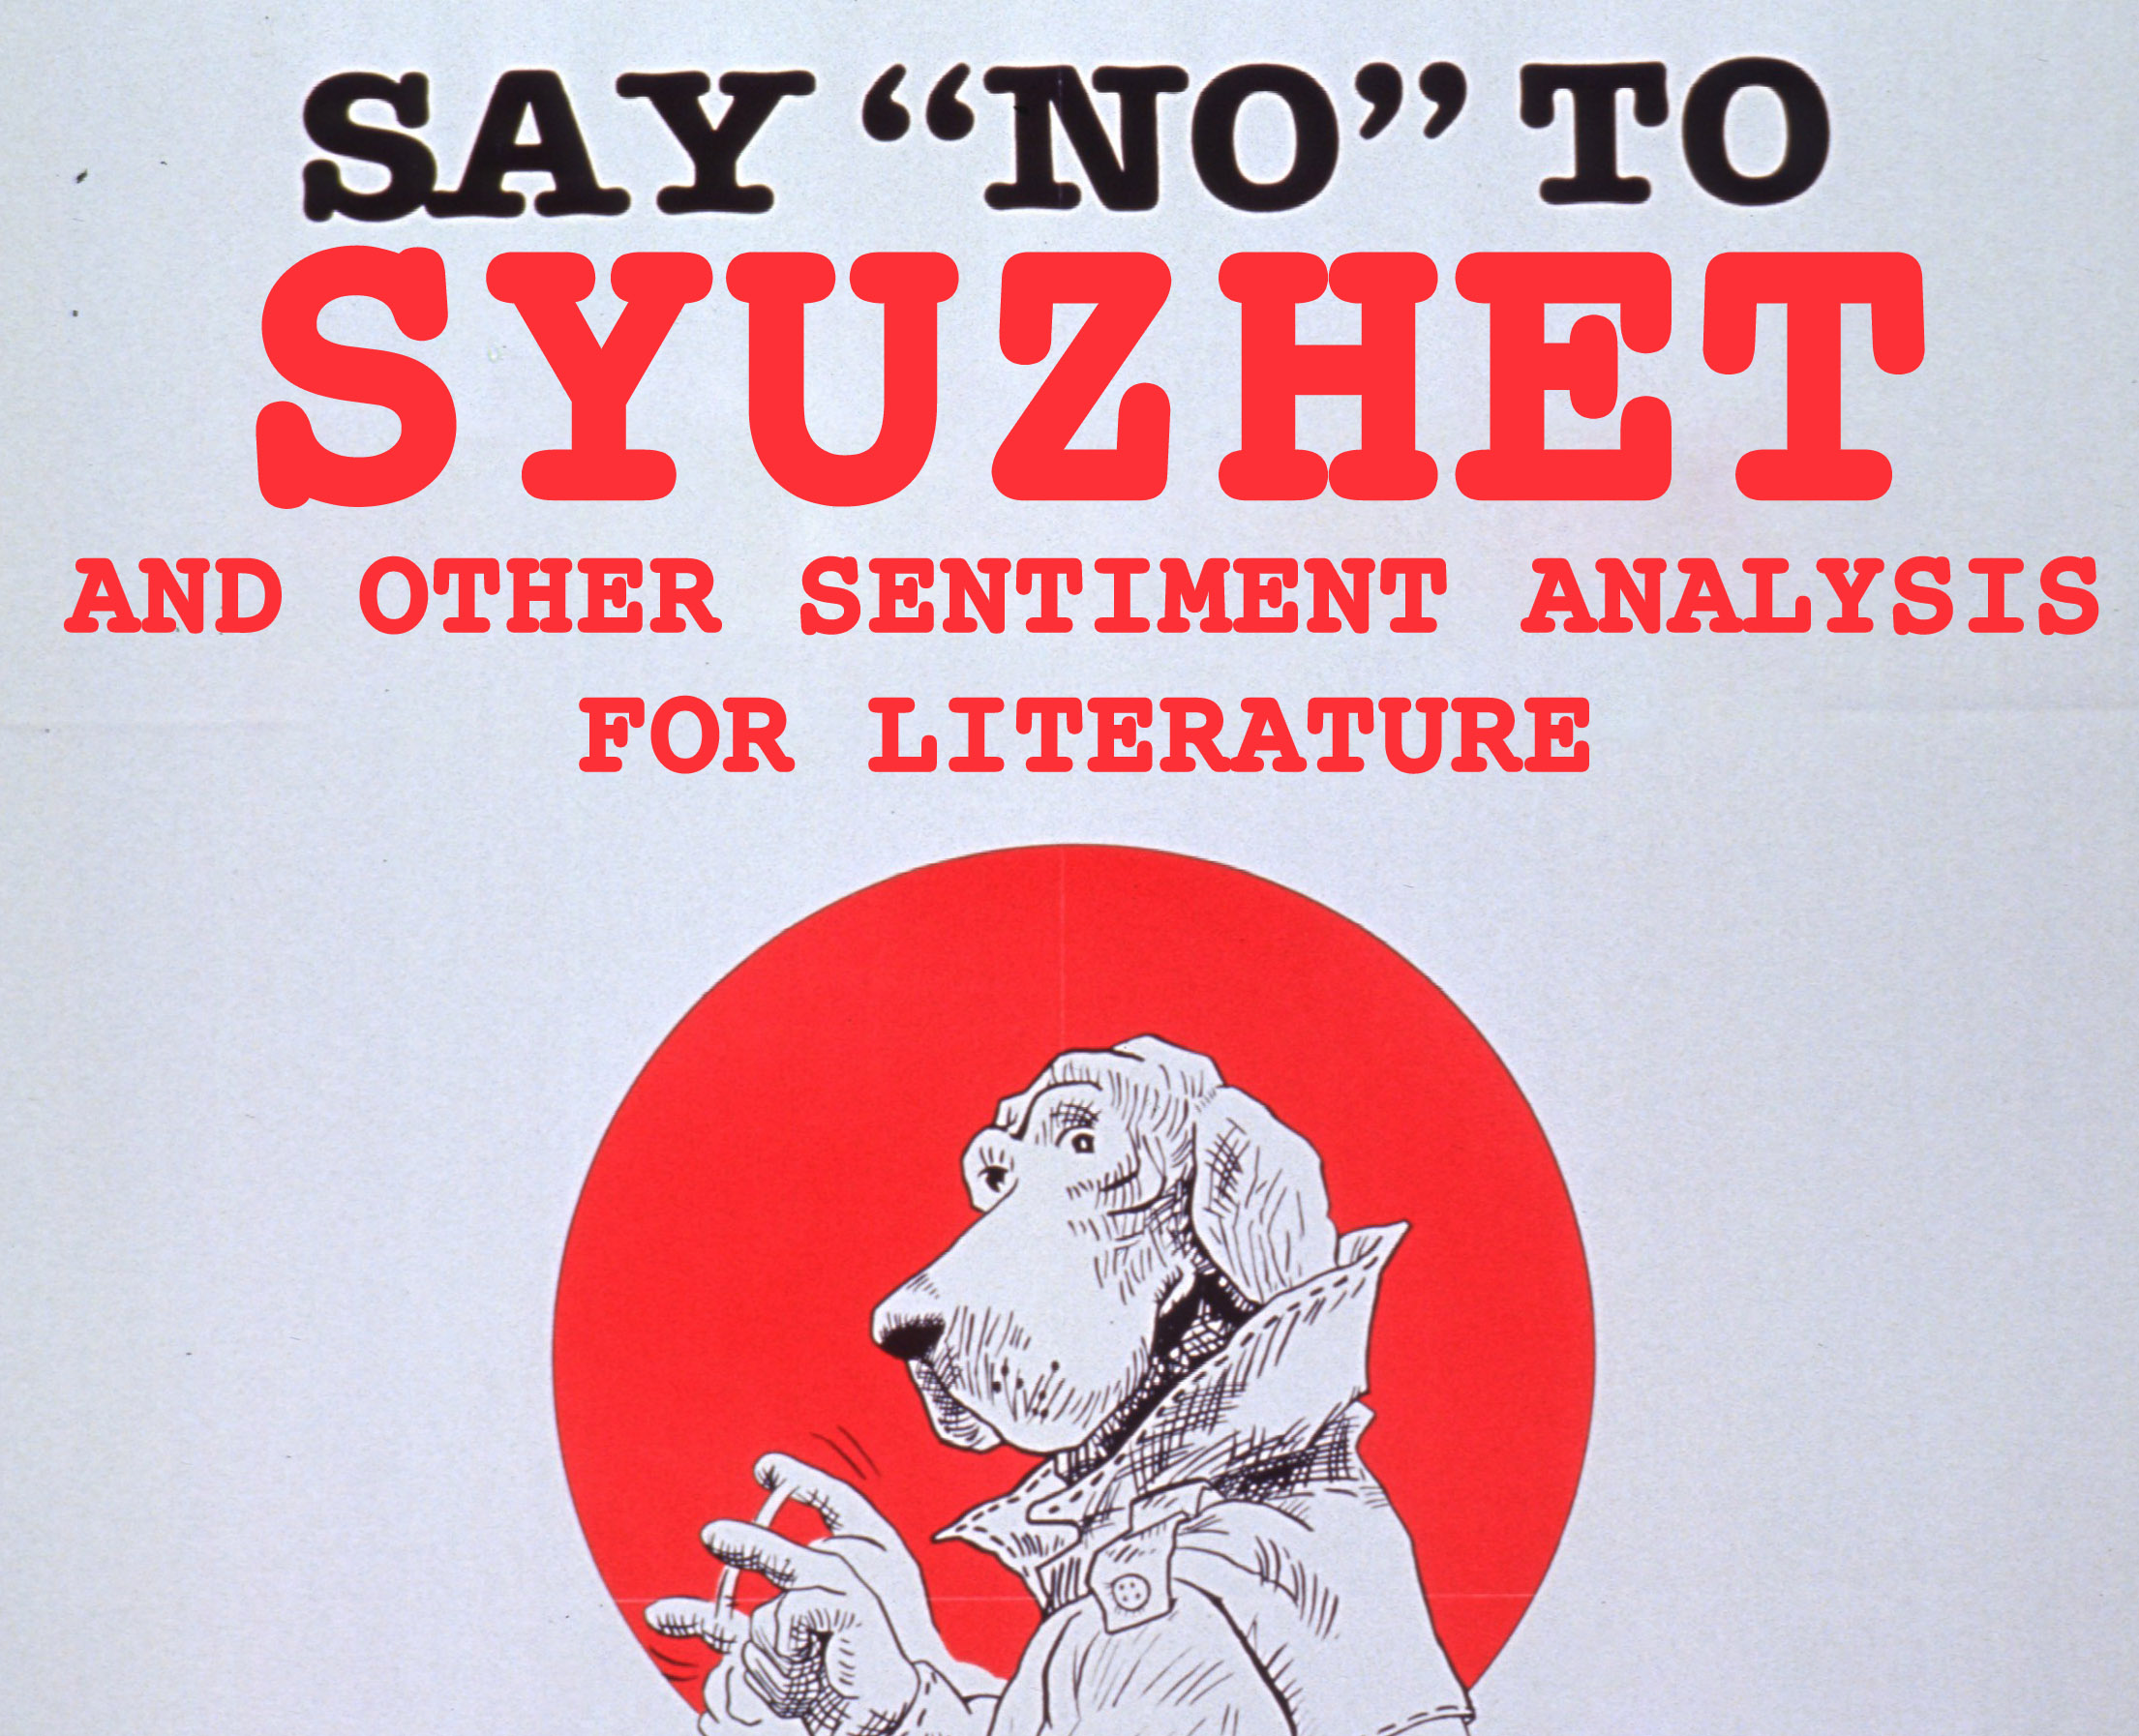 McGruff the crime dog in a 90's poster with the text 'Say No to Syuzhet and other sentiment analysis for literature'